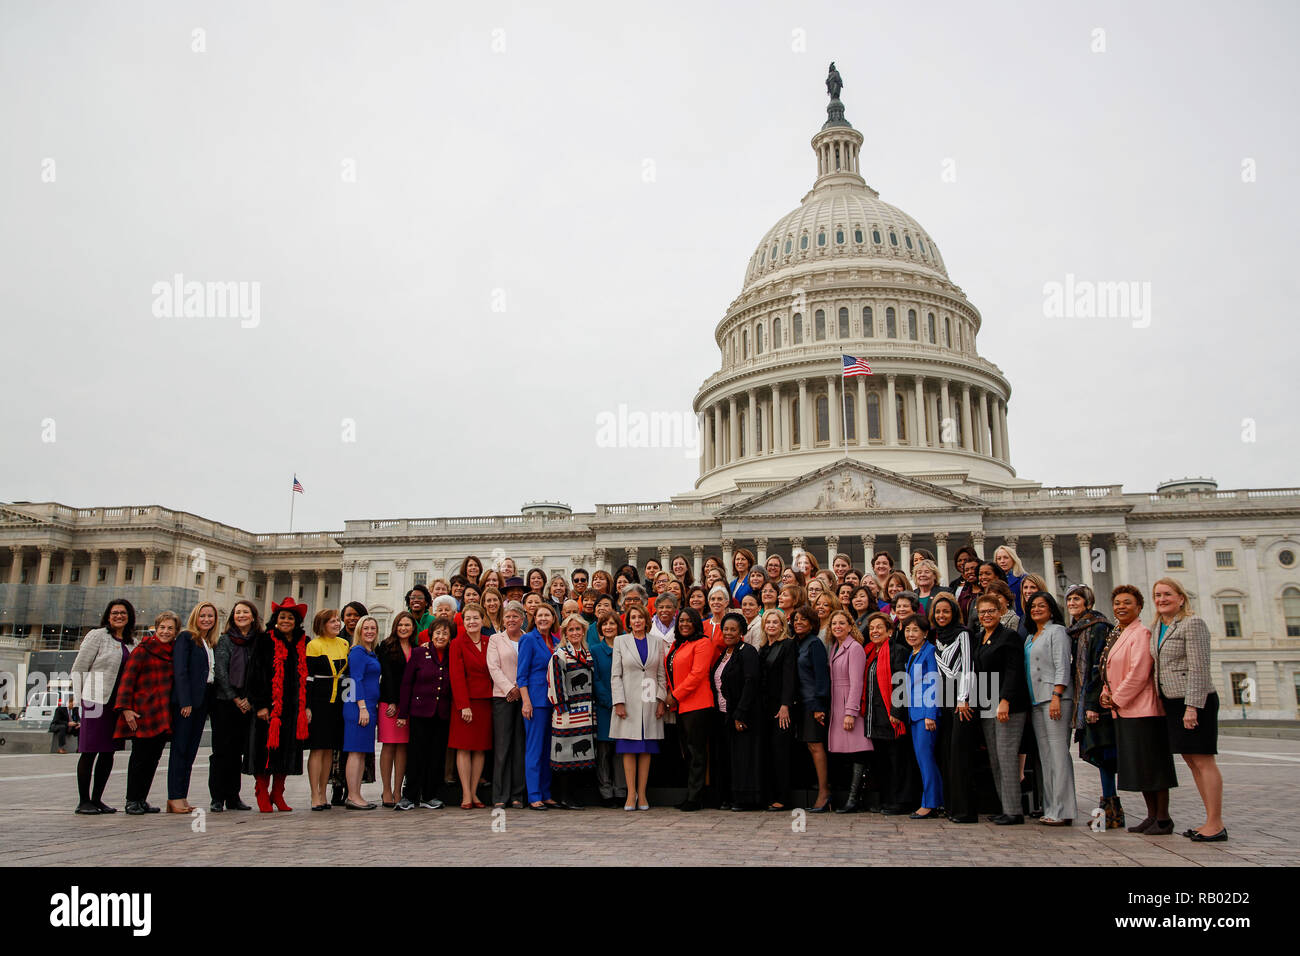 Beijing, USA. 4th Jan, 2019. Nancy Pelosi (C, front), the new speaker of the U.S. House of Representatives, poses for a group photo with the female Democratic members of the House of Representatives on Capitol Hill in Washington, DC, the United States, on Jan. 4, 2019. Credit: Ting Shen/Xinhua/Alamy Live News Stock Photo